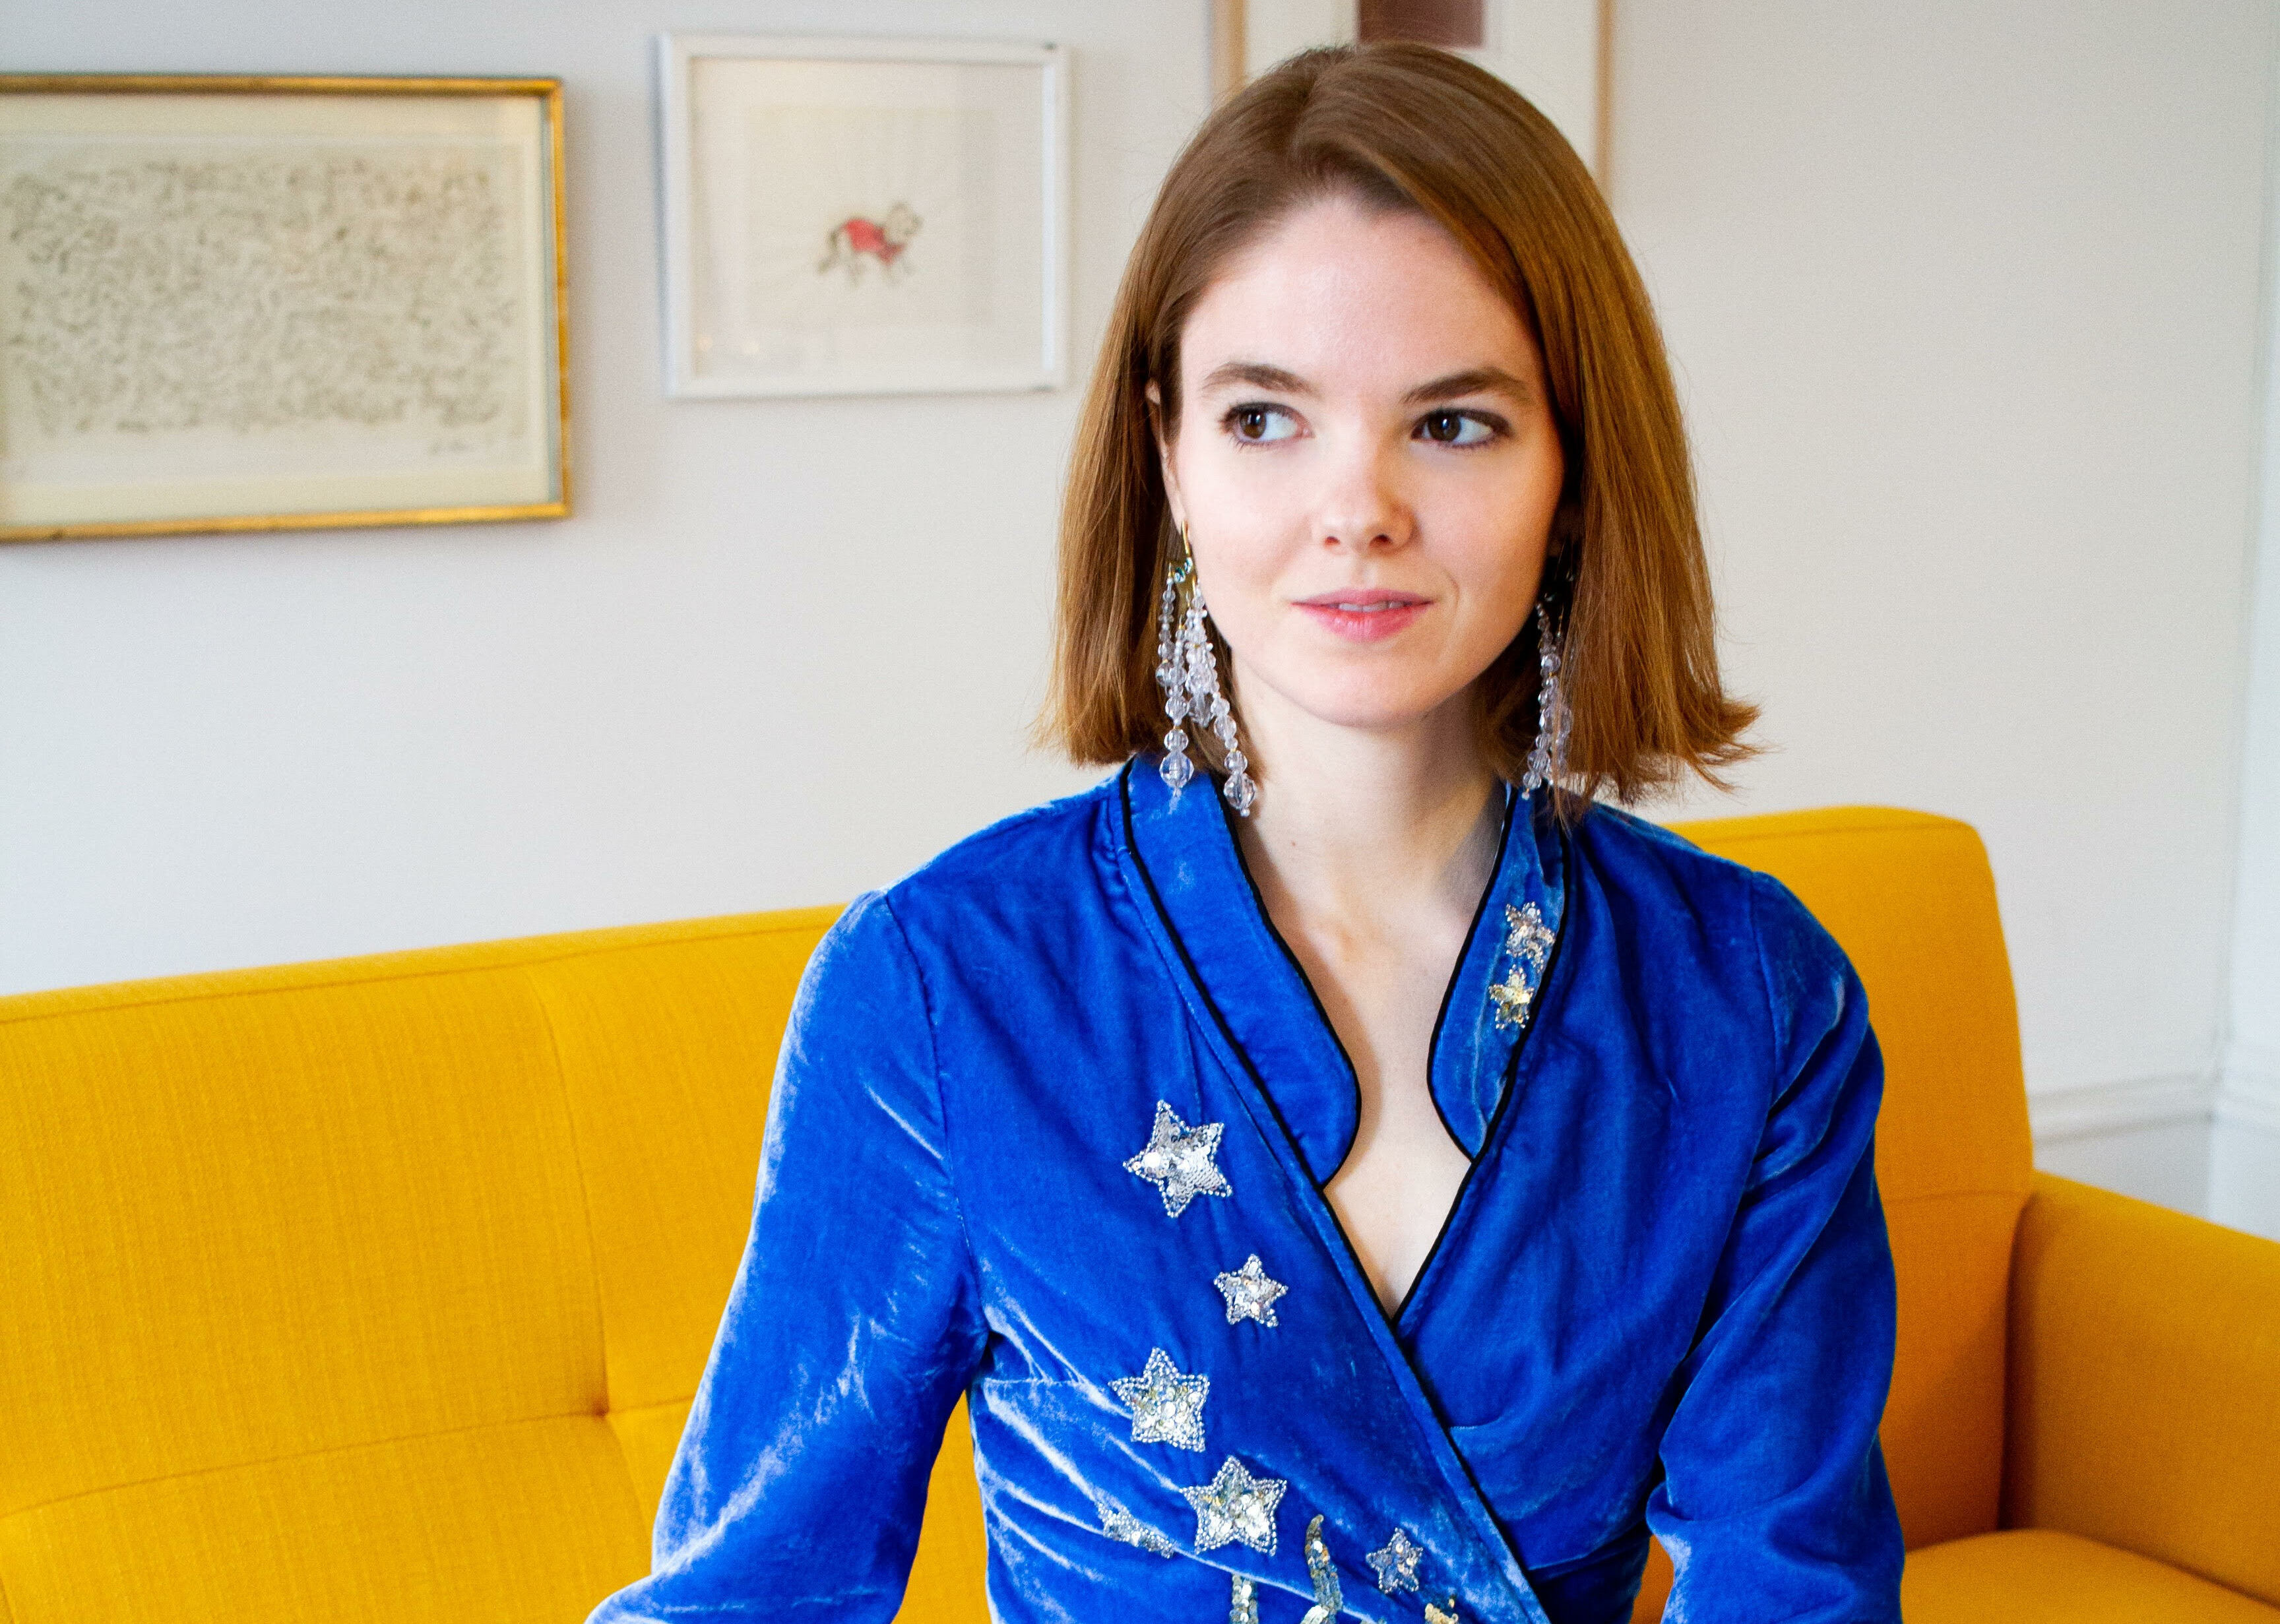 alice bell sits on a yellow couch wearing a blue dress